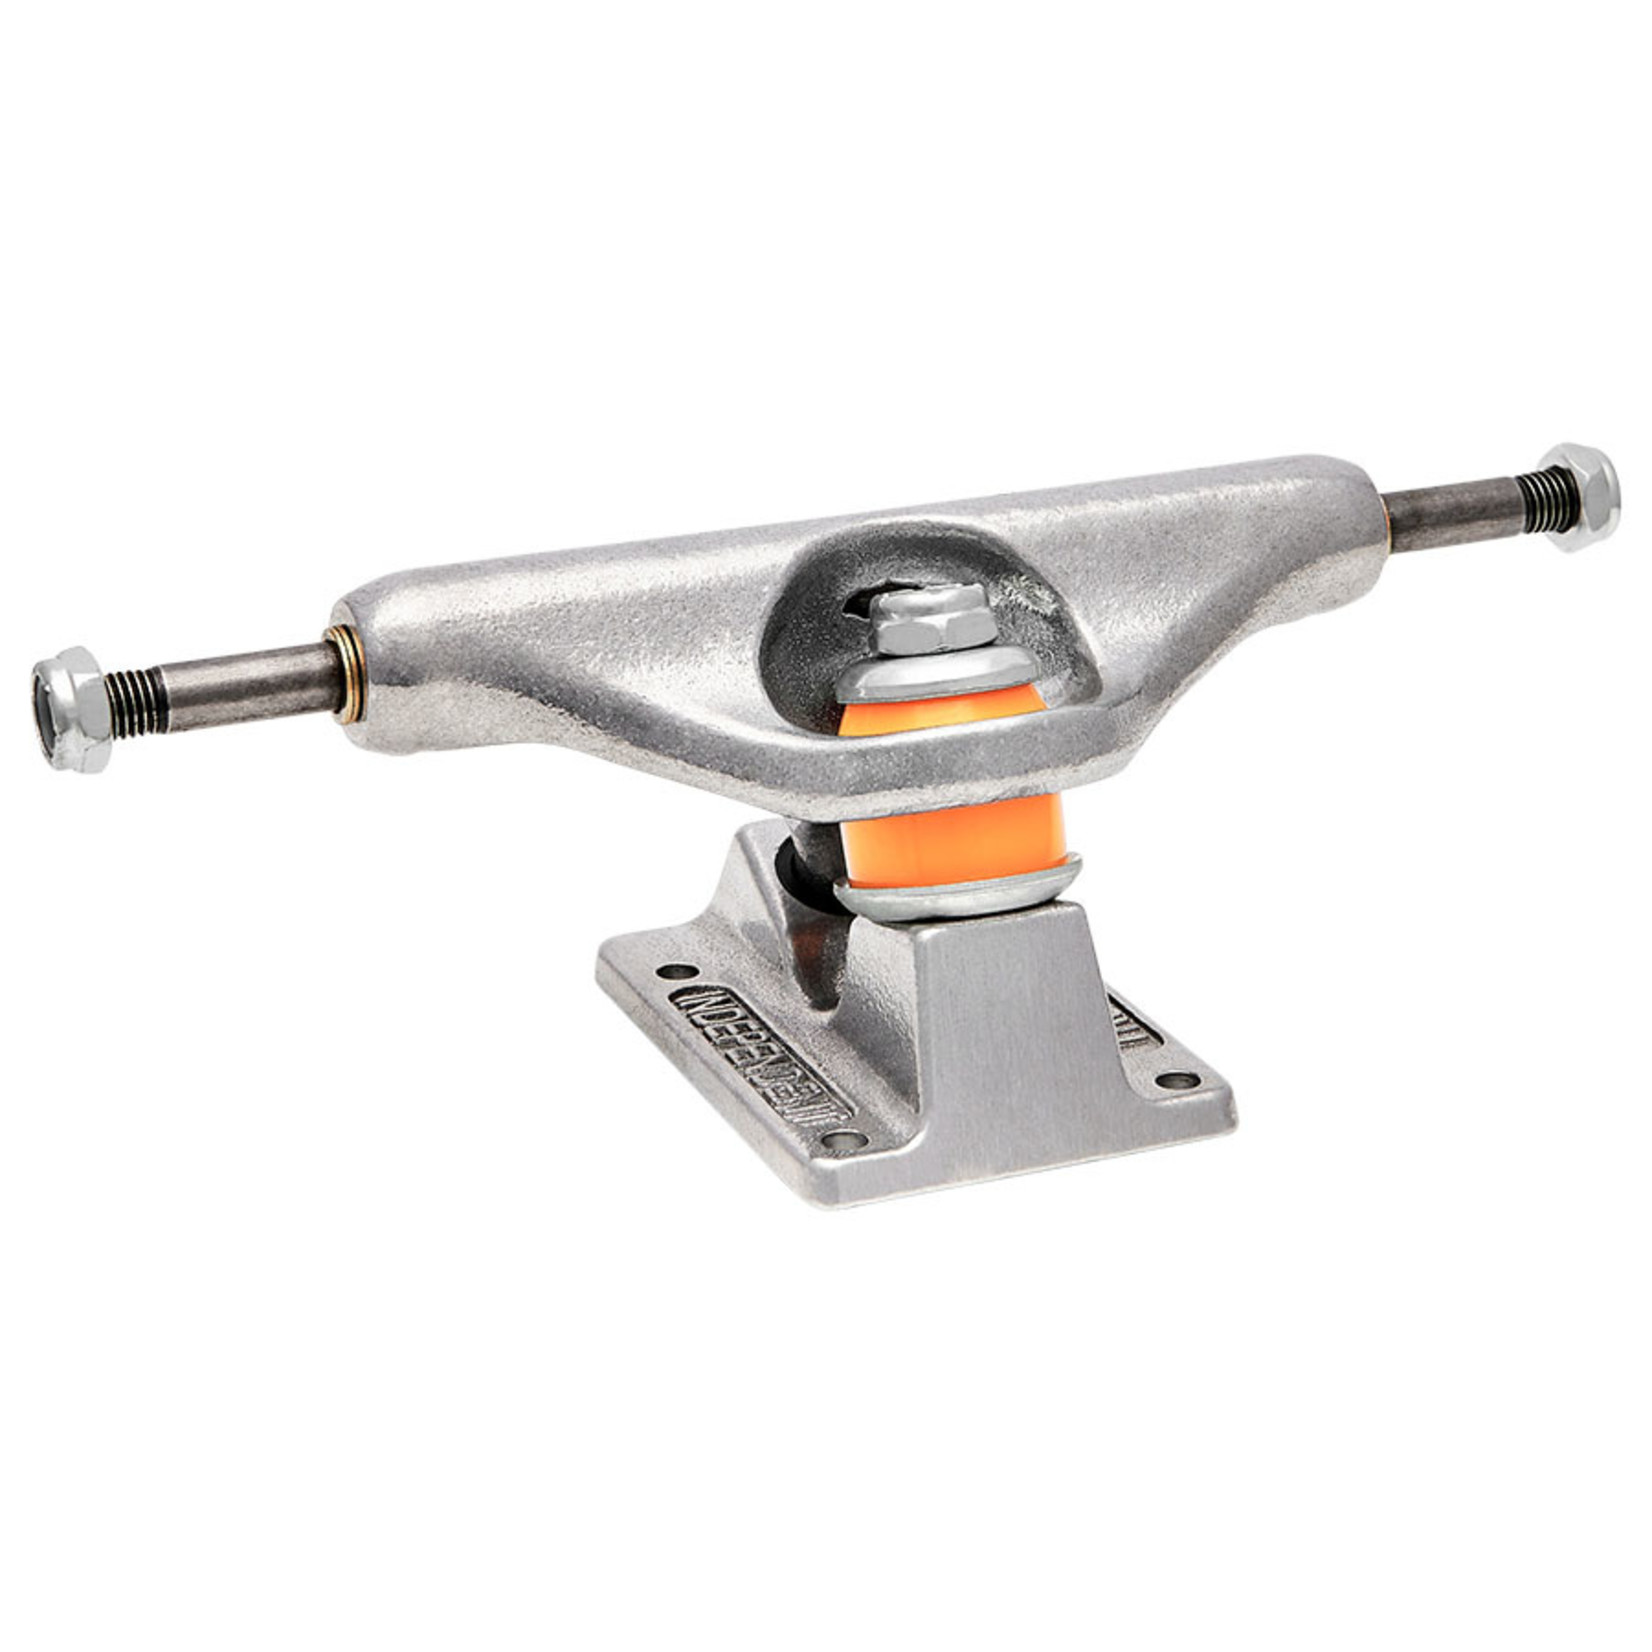 Independent Independent 139 Stage 11 Hollow Silver Trucks Set